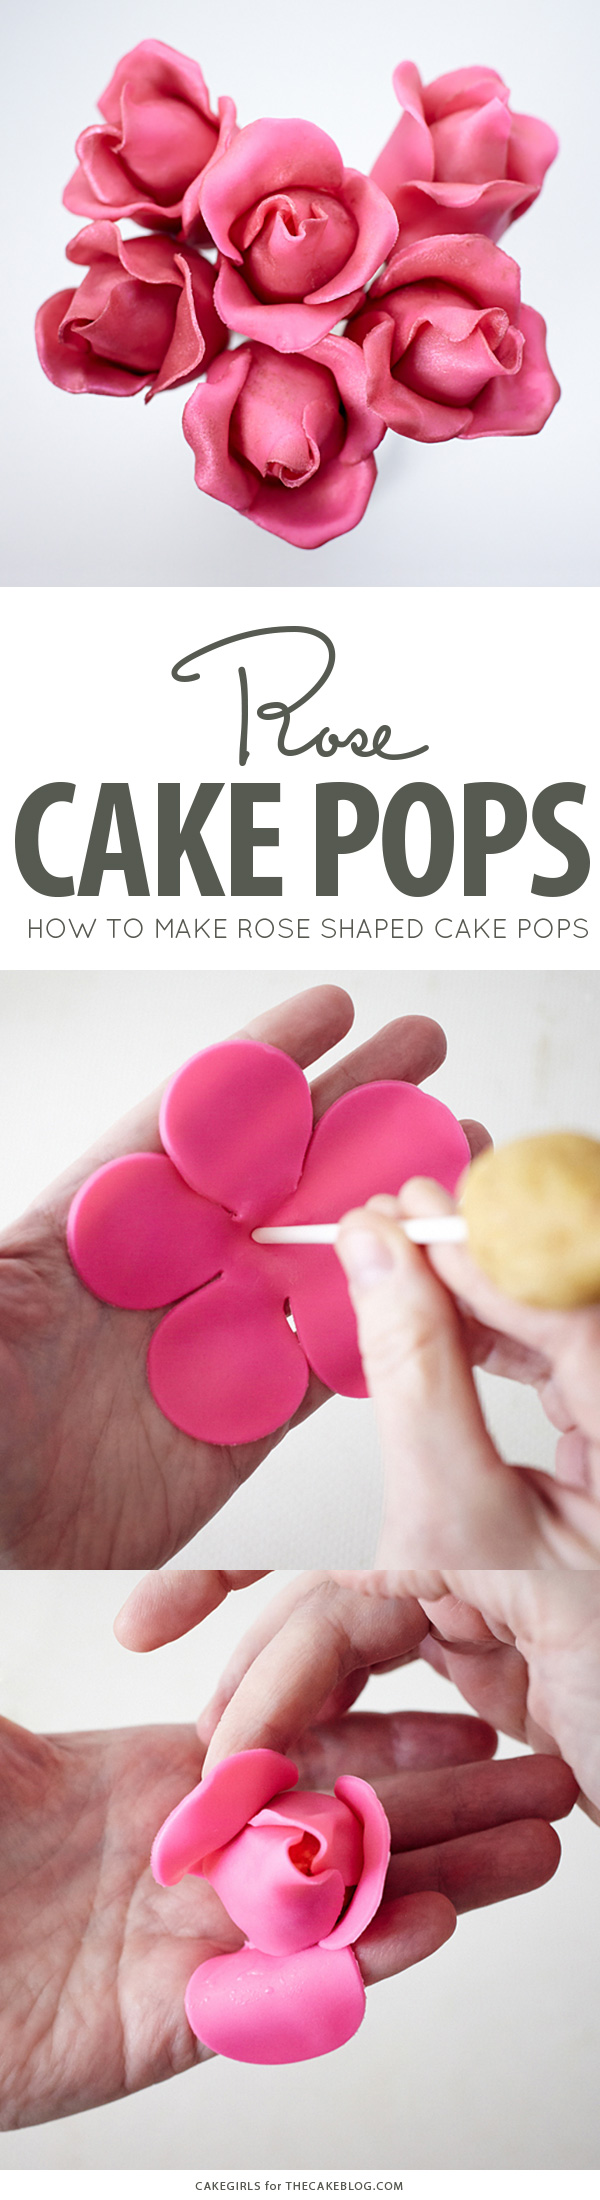 DIY Rose Cake Pops, an adorable dessert for Valentine's Day, Mother's Day and bridal showers | by Cakegirls for TheCakeBlog.com